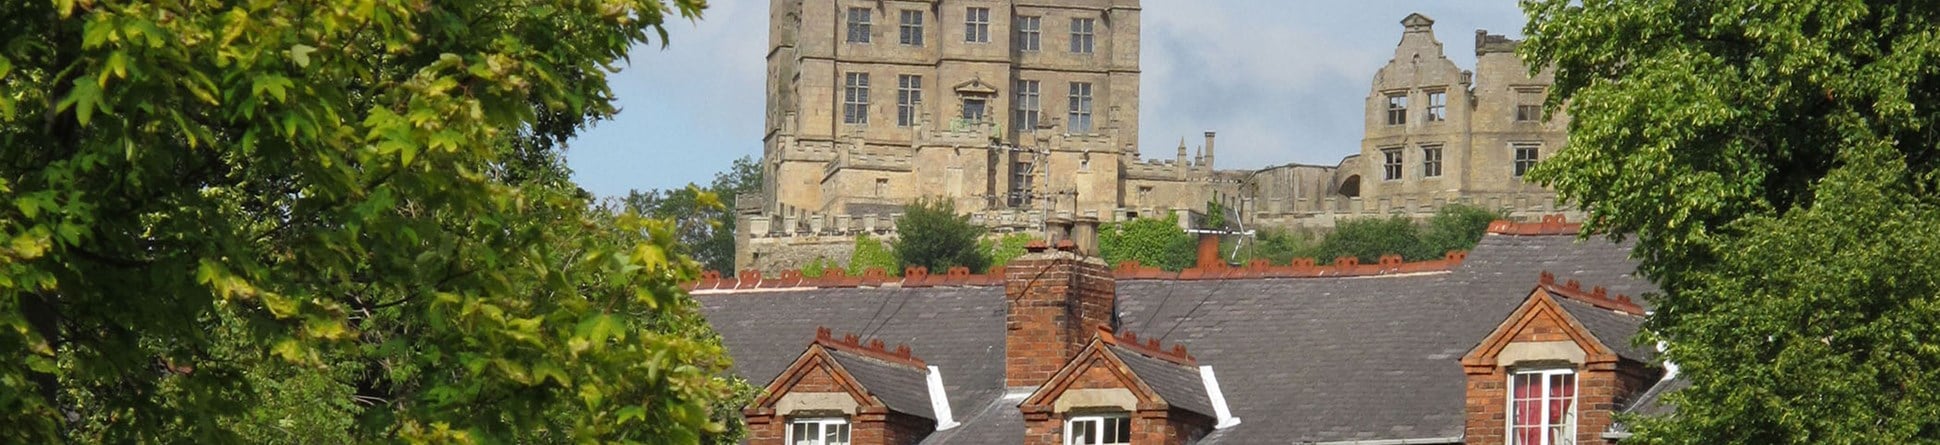 New Bolsover Model Village, Derbyshire, where much of Historic England’s research into energy performance and the effects of measures to increase energy efficiency is being carried out. Bolsover Castle is visible in the background